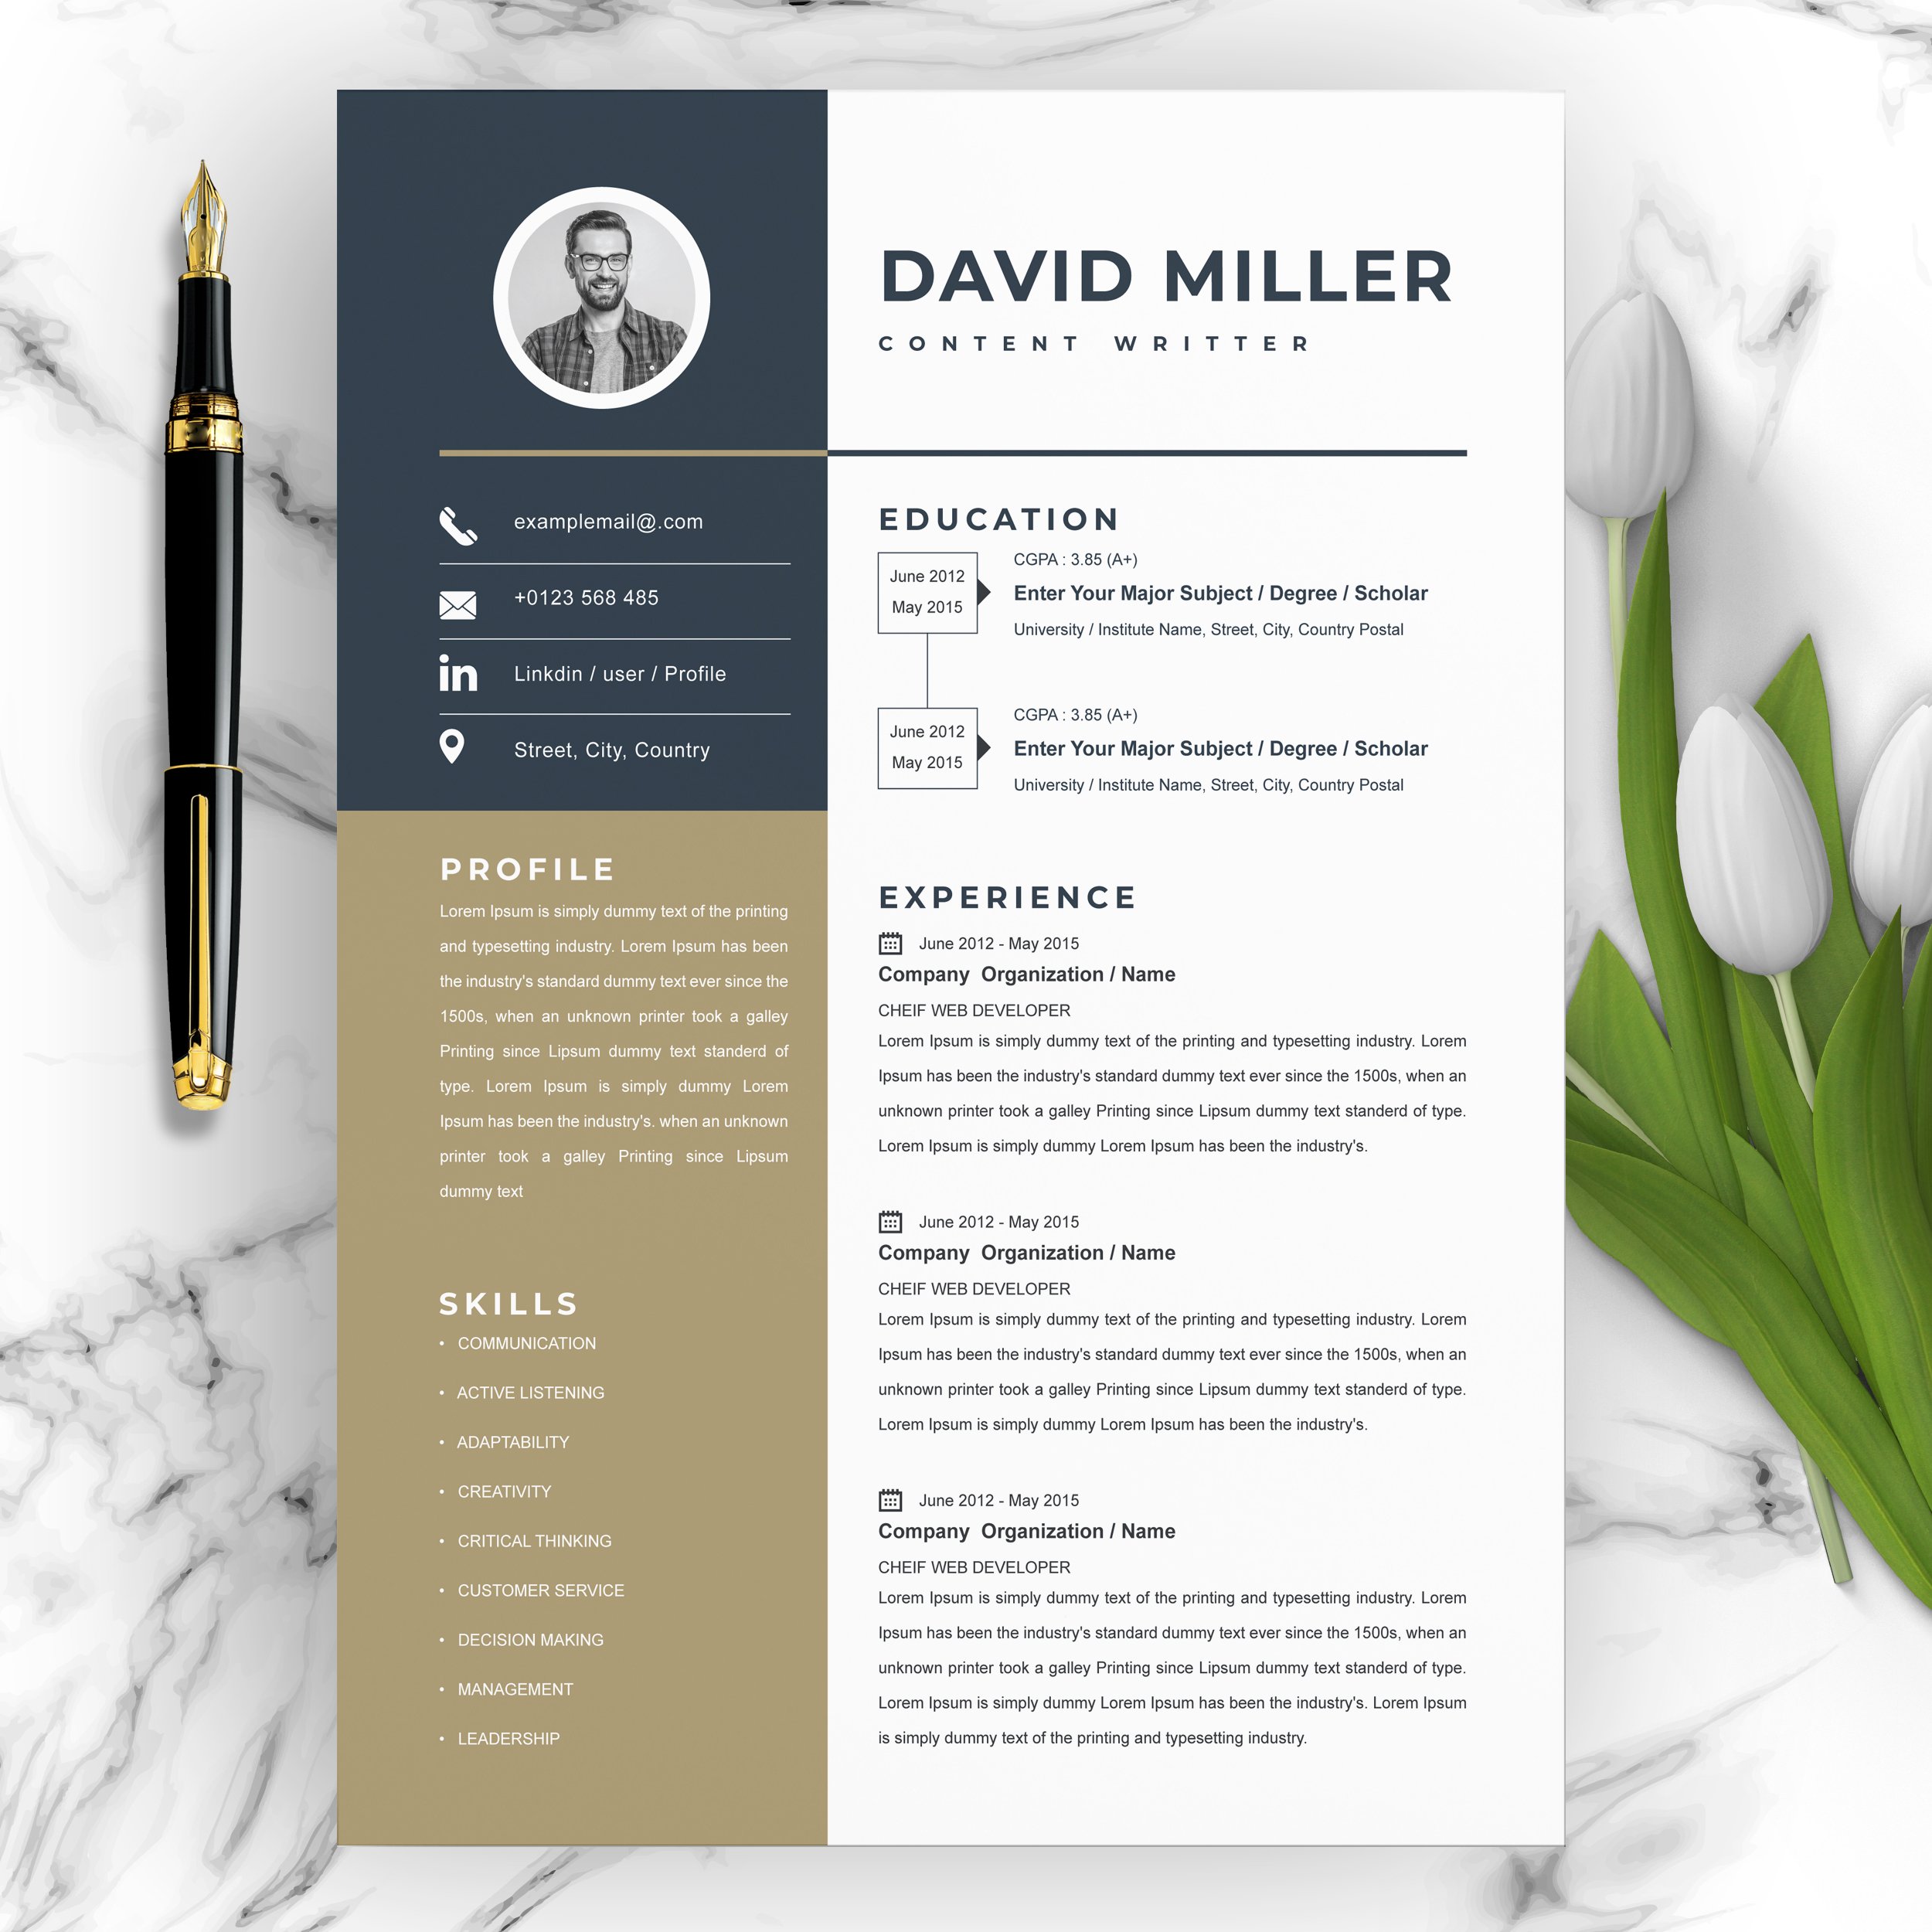 Content Writer Resume / CV Format cover image.